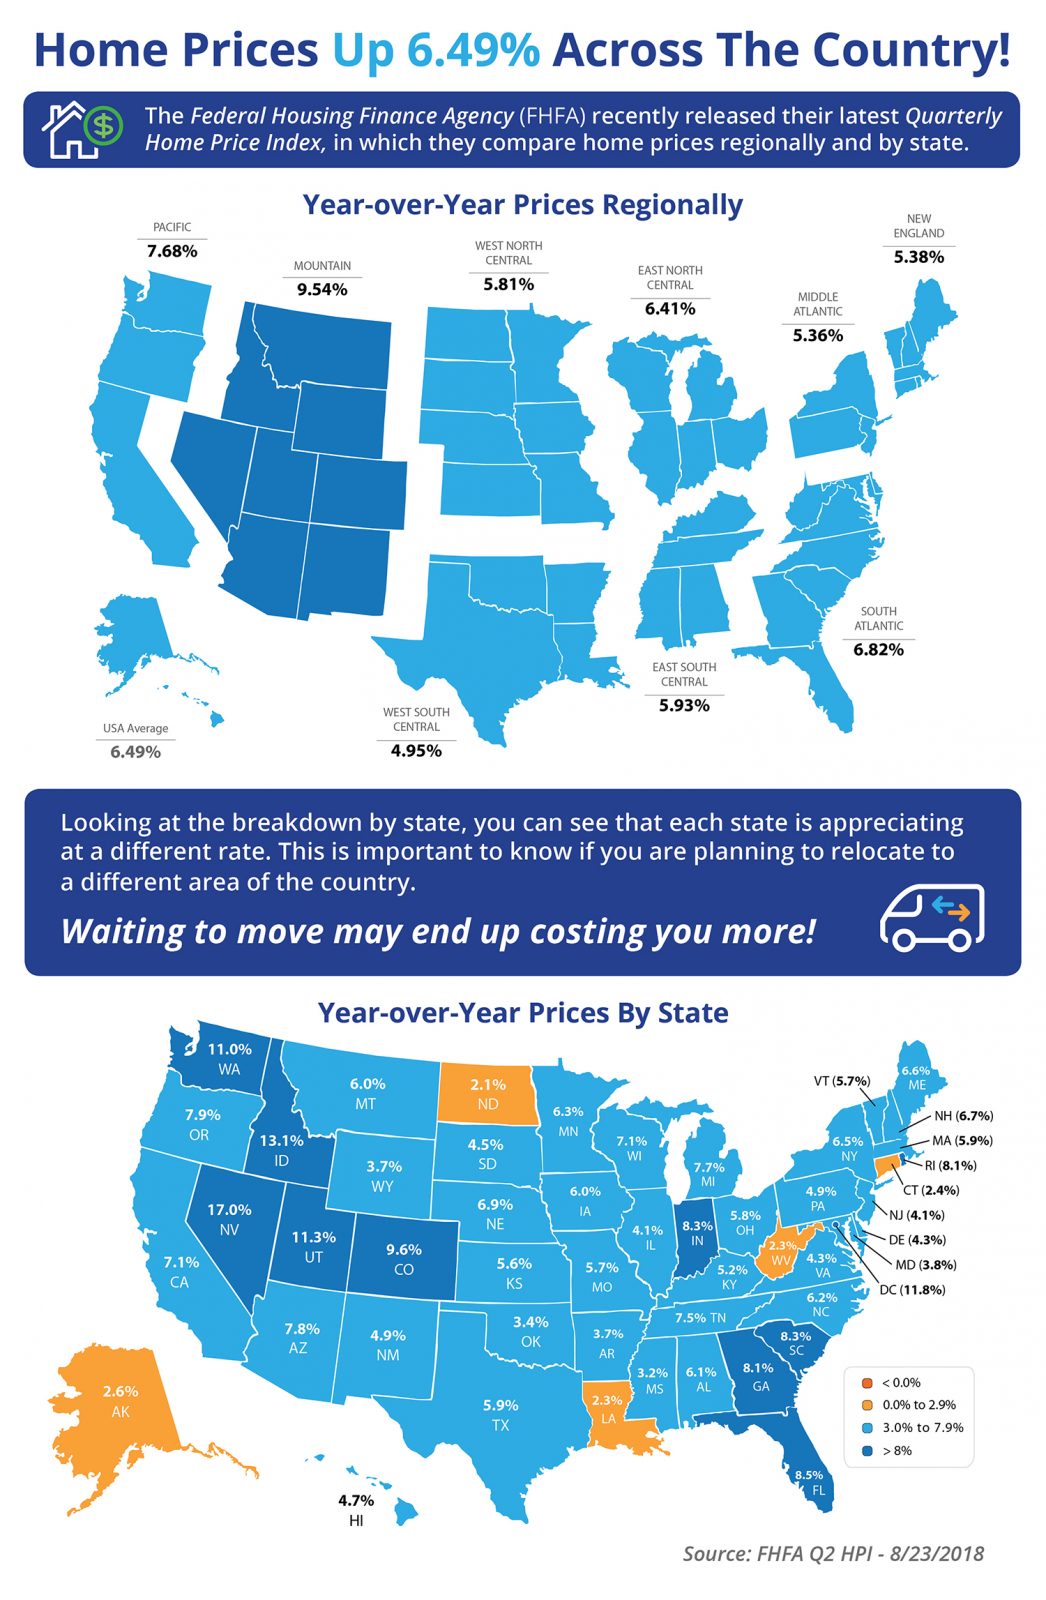 Home Prices Up 6.49% Across the Country! [INFOGRAPHIC] | MyKCM